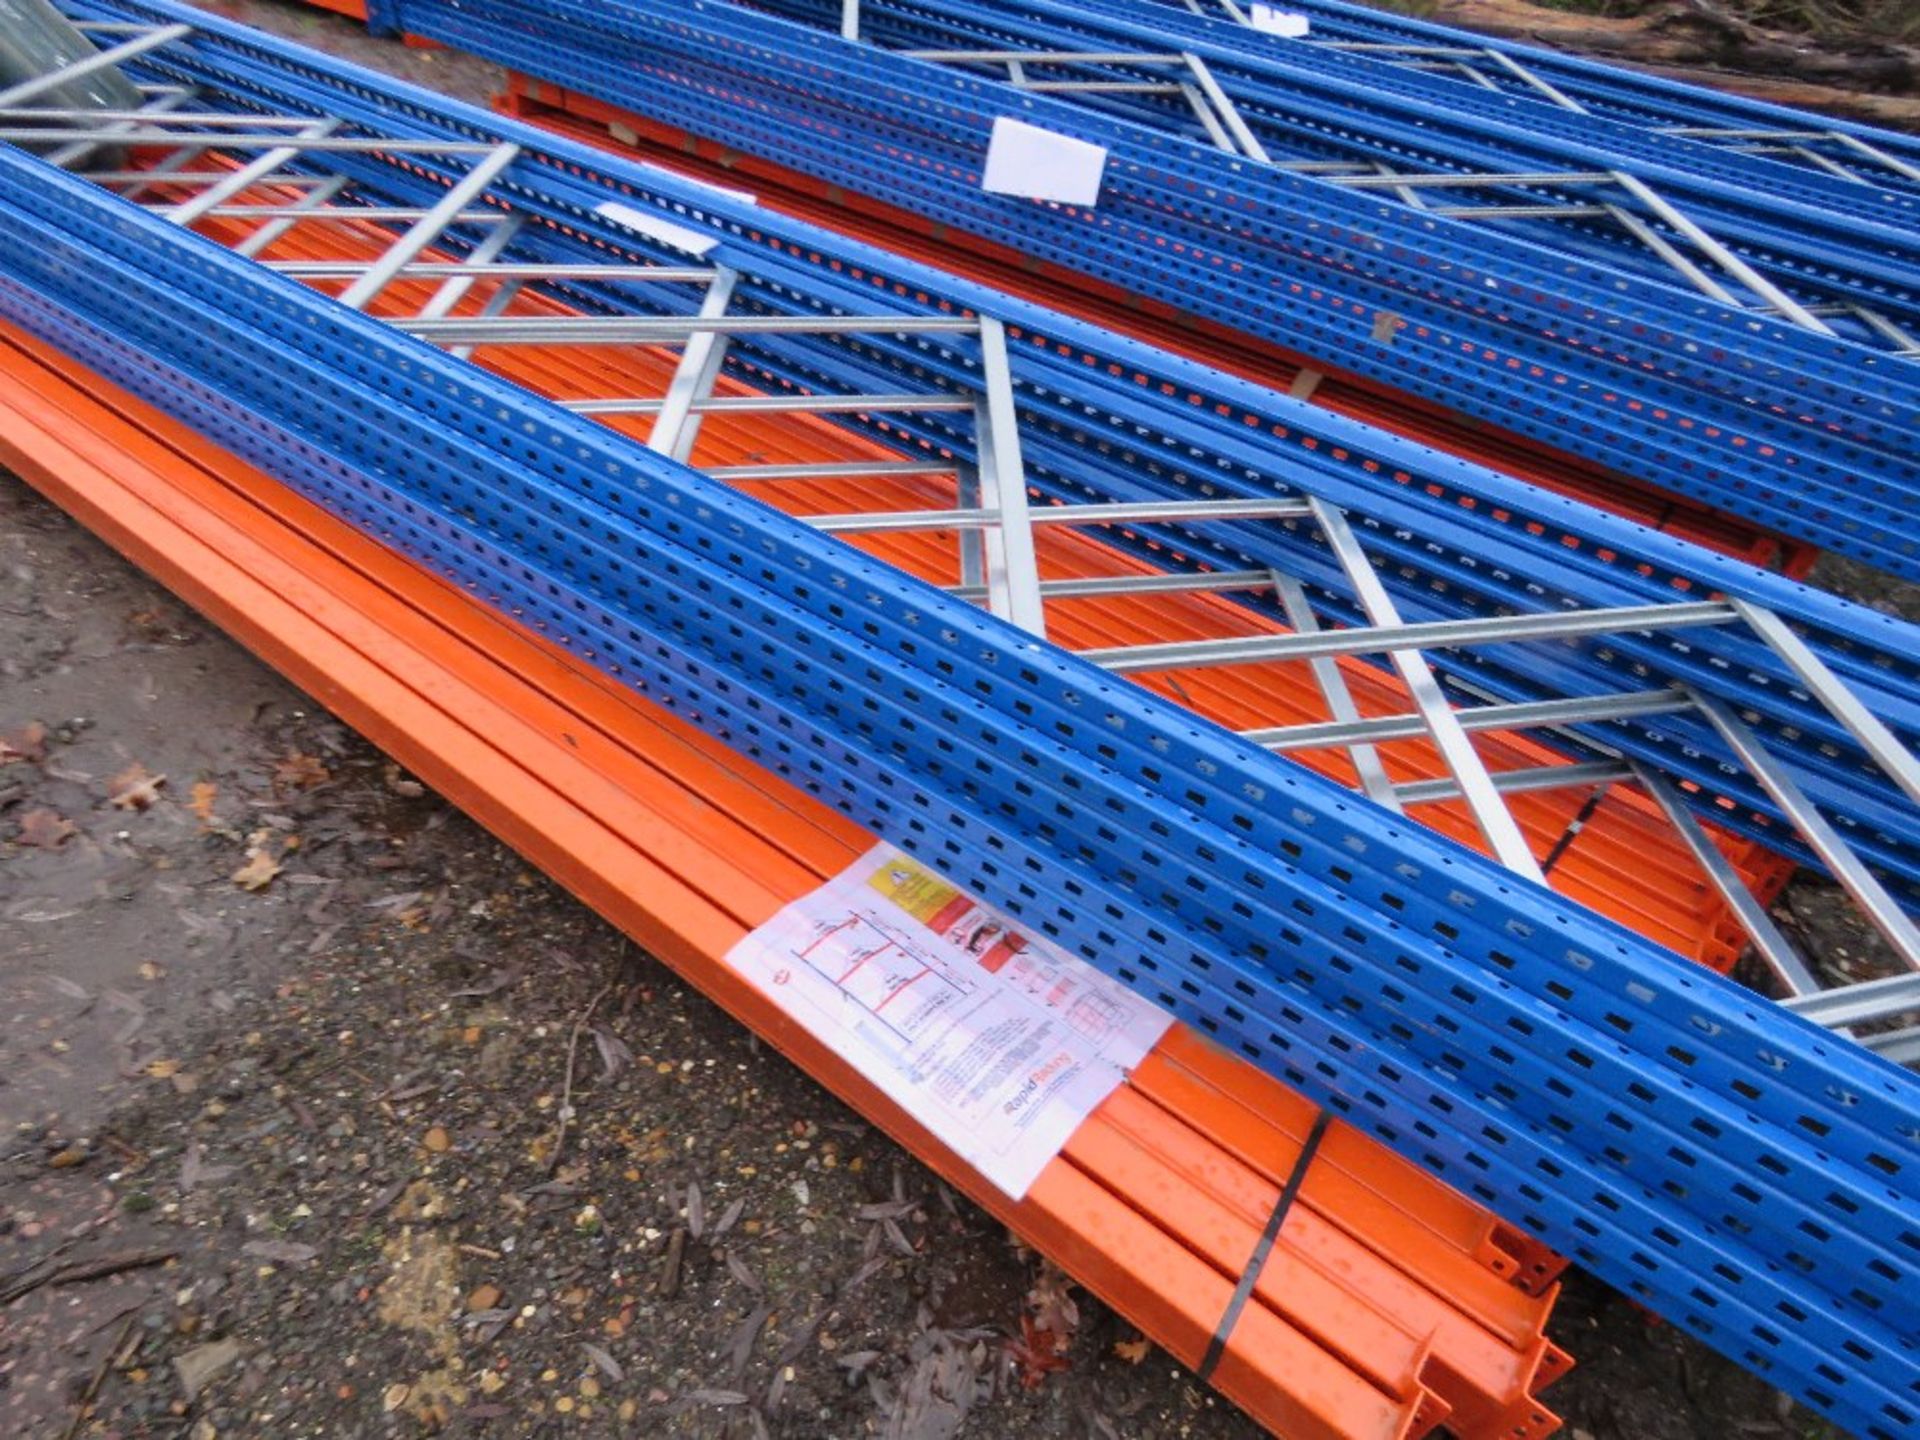 HEAVY DUTY PALLET RACKING: 5 X UPRIGHTS @ 5M HEIGHT WITH A WIDTH OF 0.9M, PLUS 24NO BEAMS @ 3.9M LEN - Bild 5 aus 5